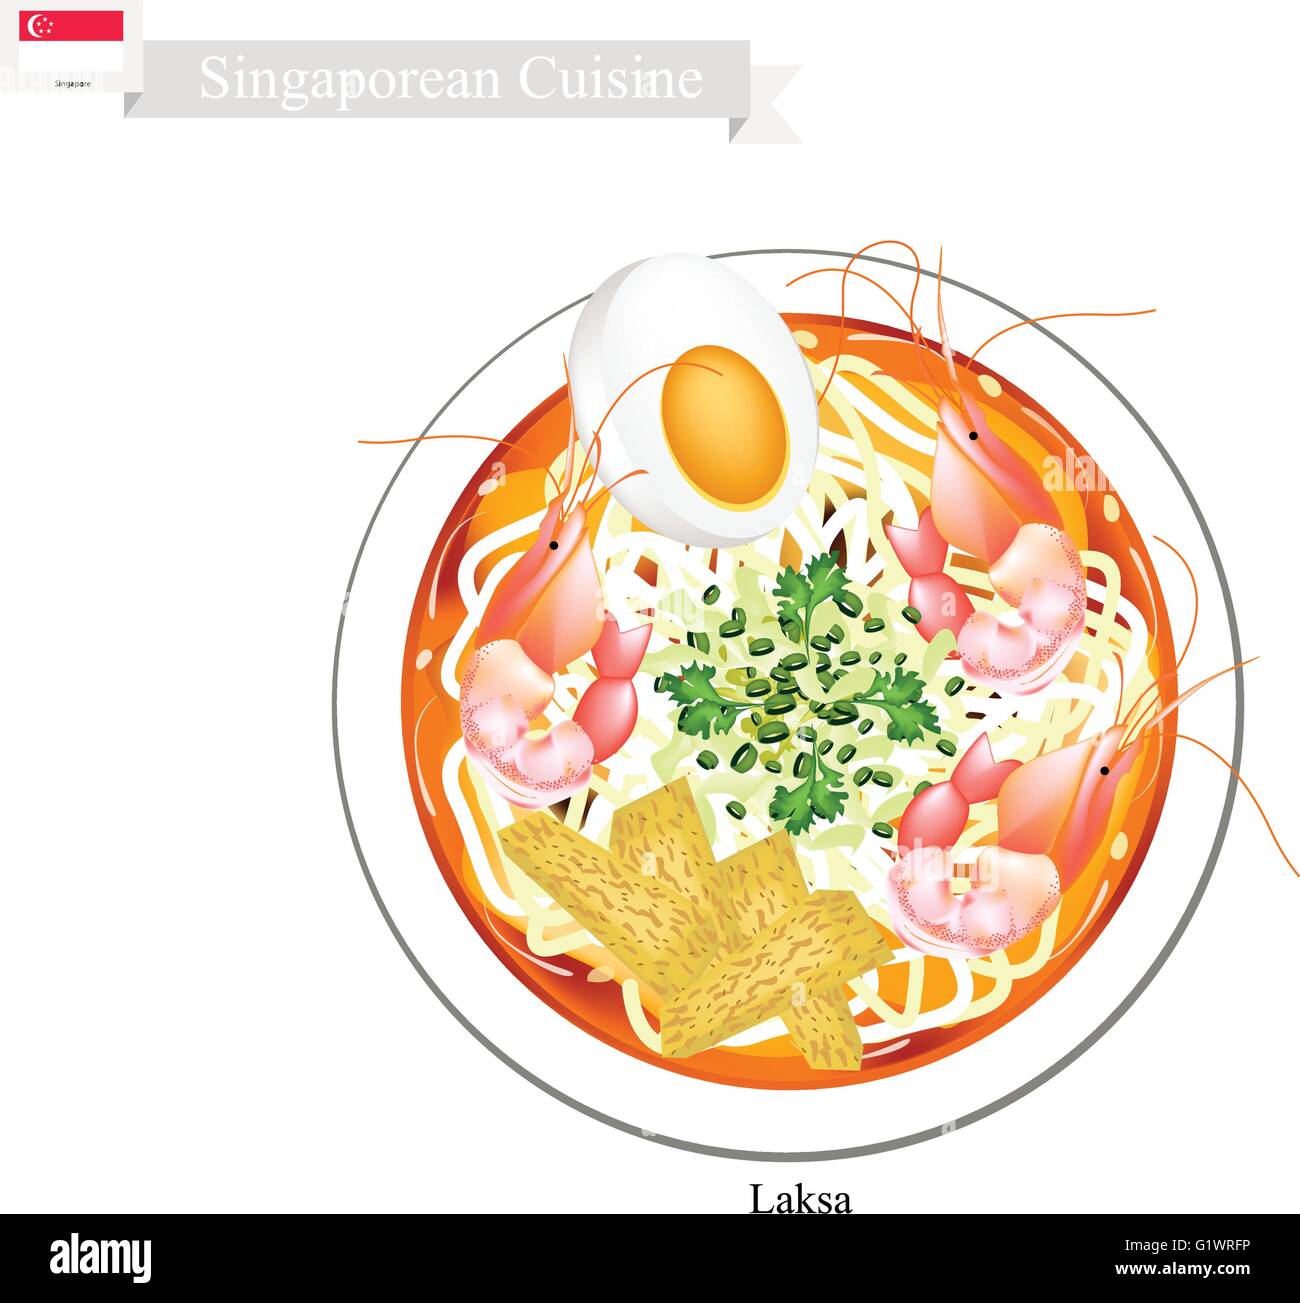 Singaporean Cuisine, Laksa or Traditional Rice Noodle Served in Spicy Soup. One of The Most Popular Dish in Singapore. Stock Vector